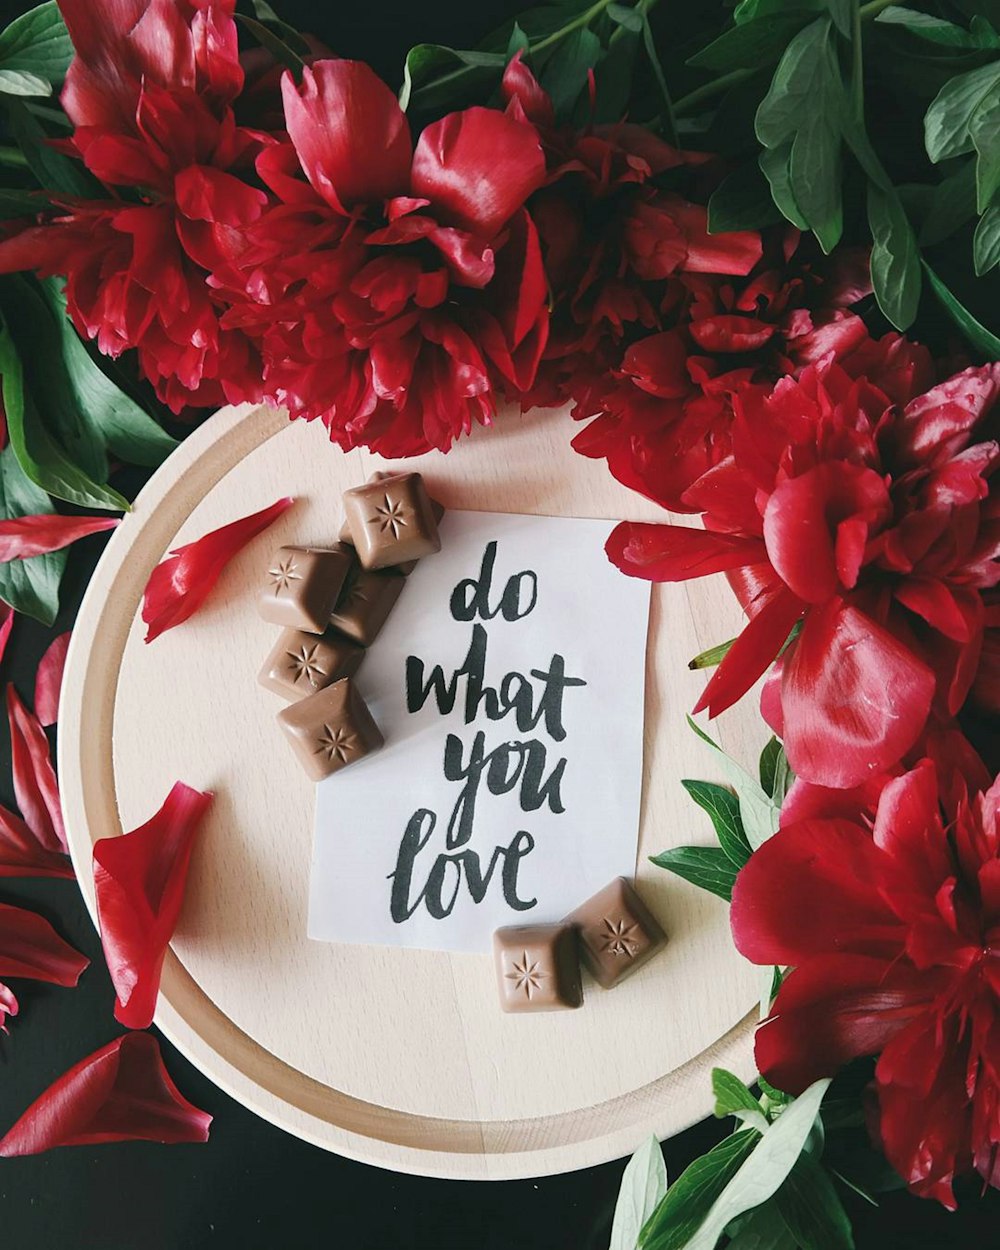 A note on a piece of paper on top of a plate next to red flowers that reads "Do what you love."